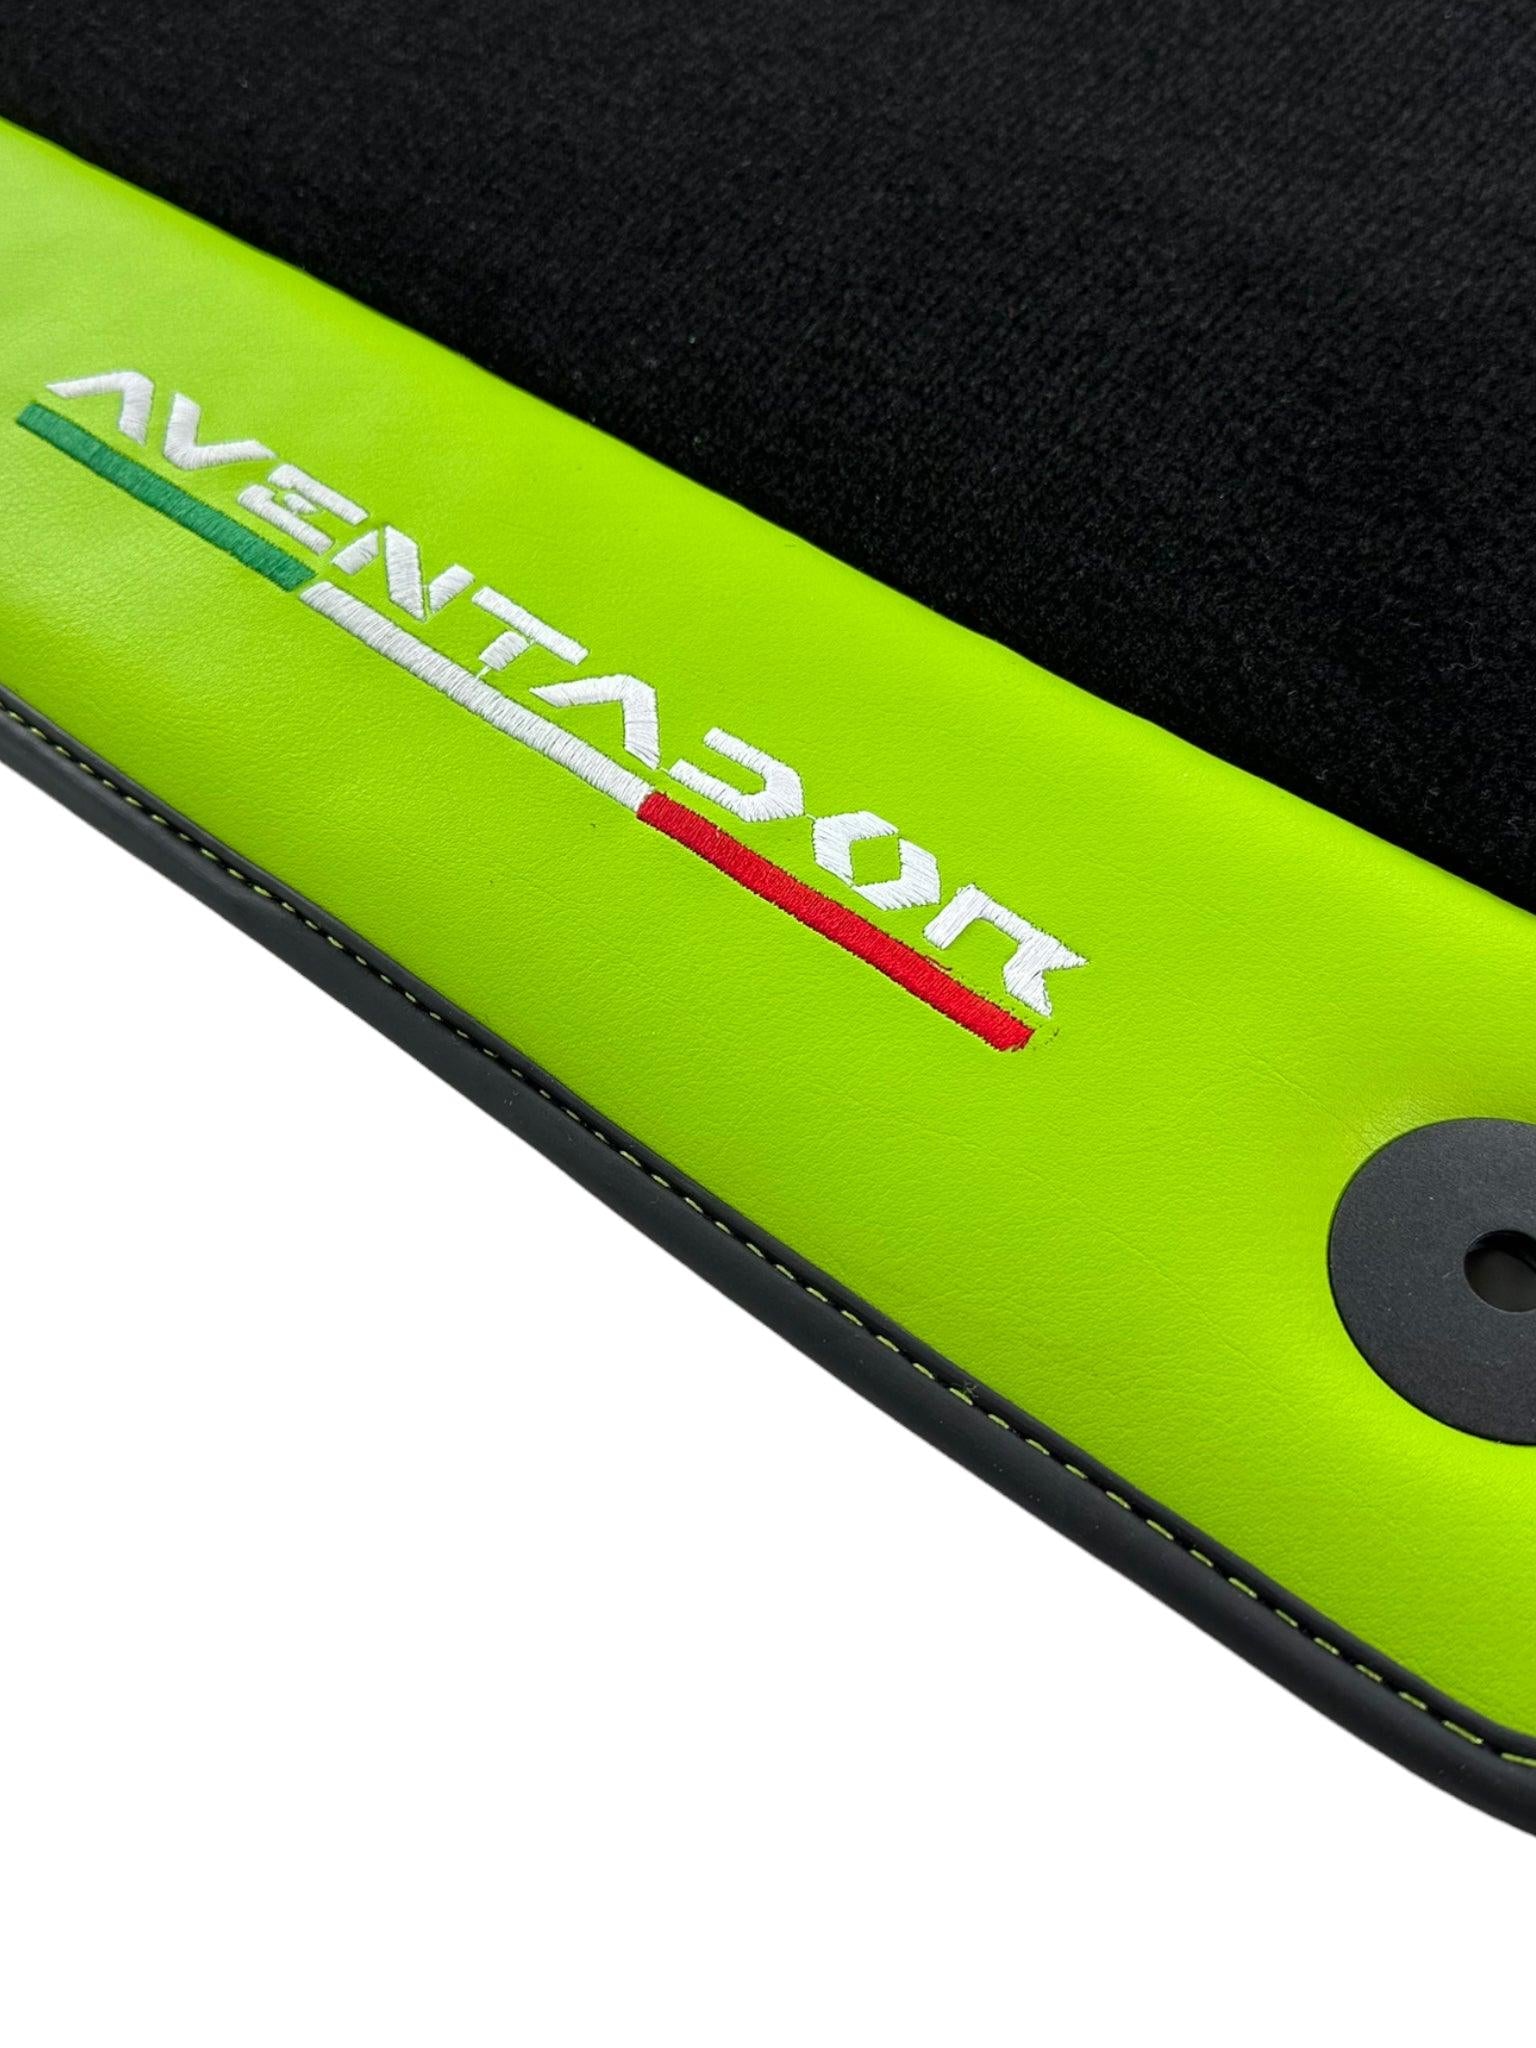 Black Floor Mats for Lamborghini Aventador With Green Leather - AutoWin